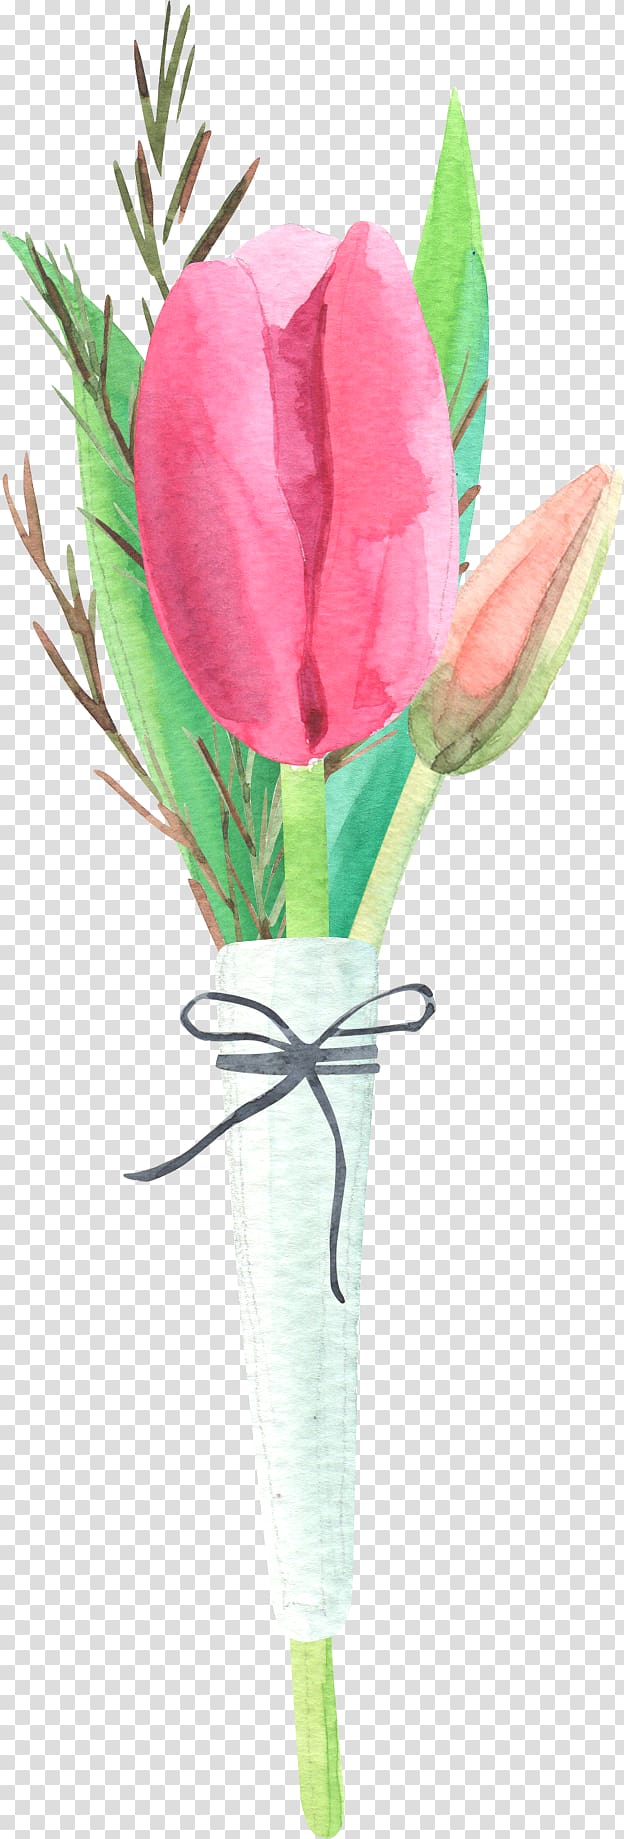 pink and green tulip flower art, Tulip Flower Floral design, Bow and tulips transparent background PNG clipart